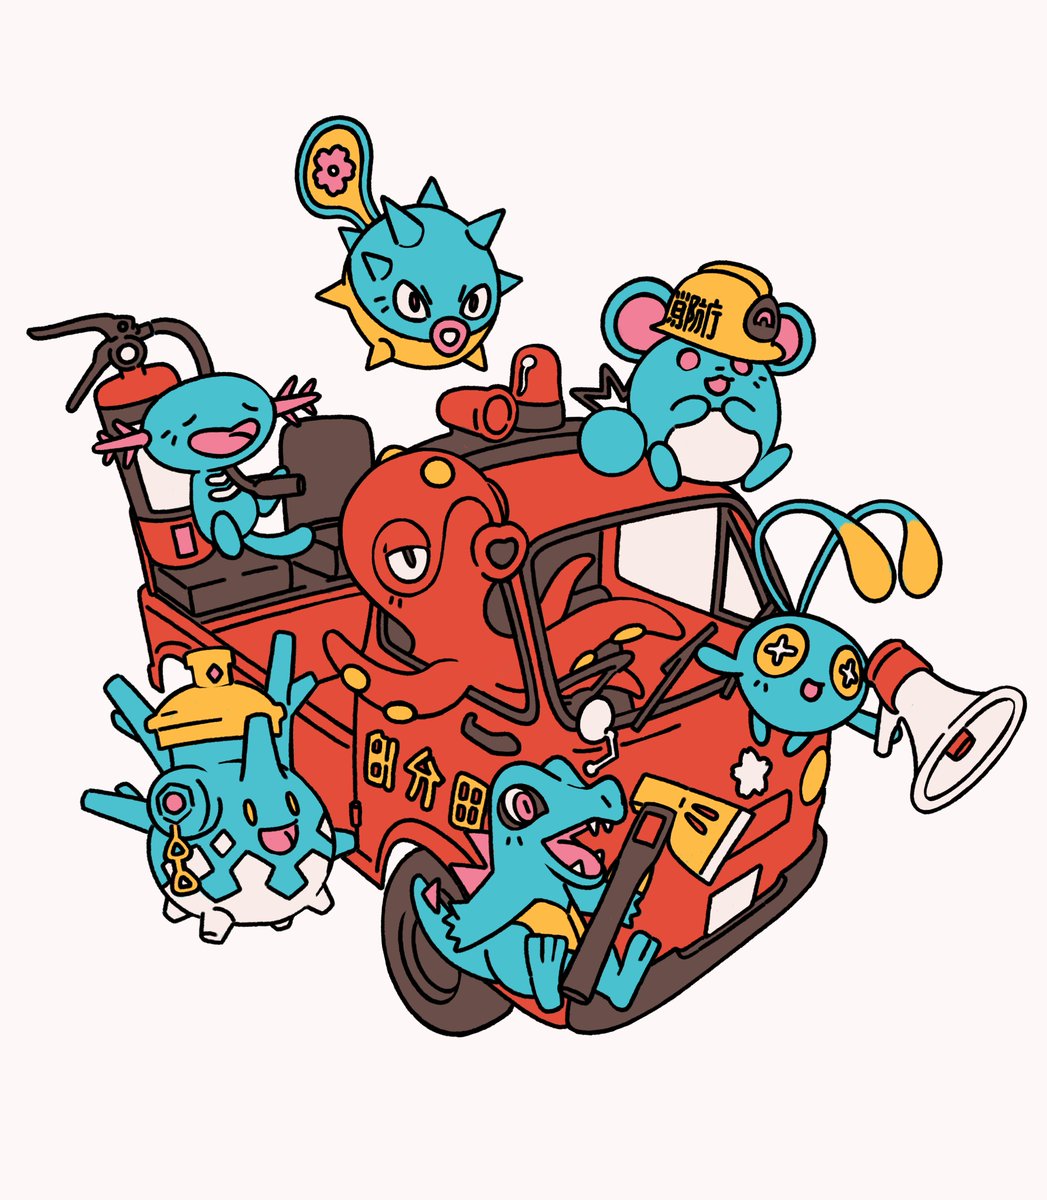 RT @SablingArt: Johto's own fire fighting squad https://t.co/ZT1Wb6Hzxc